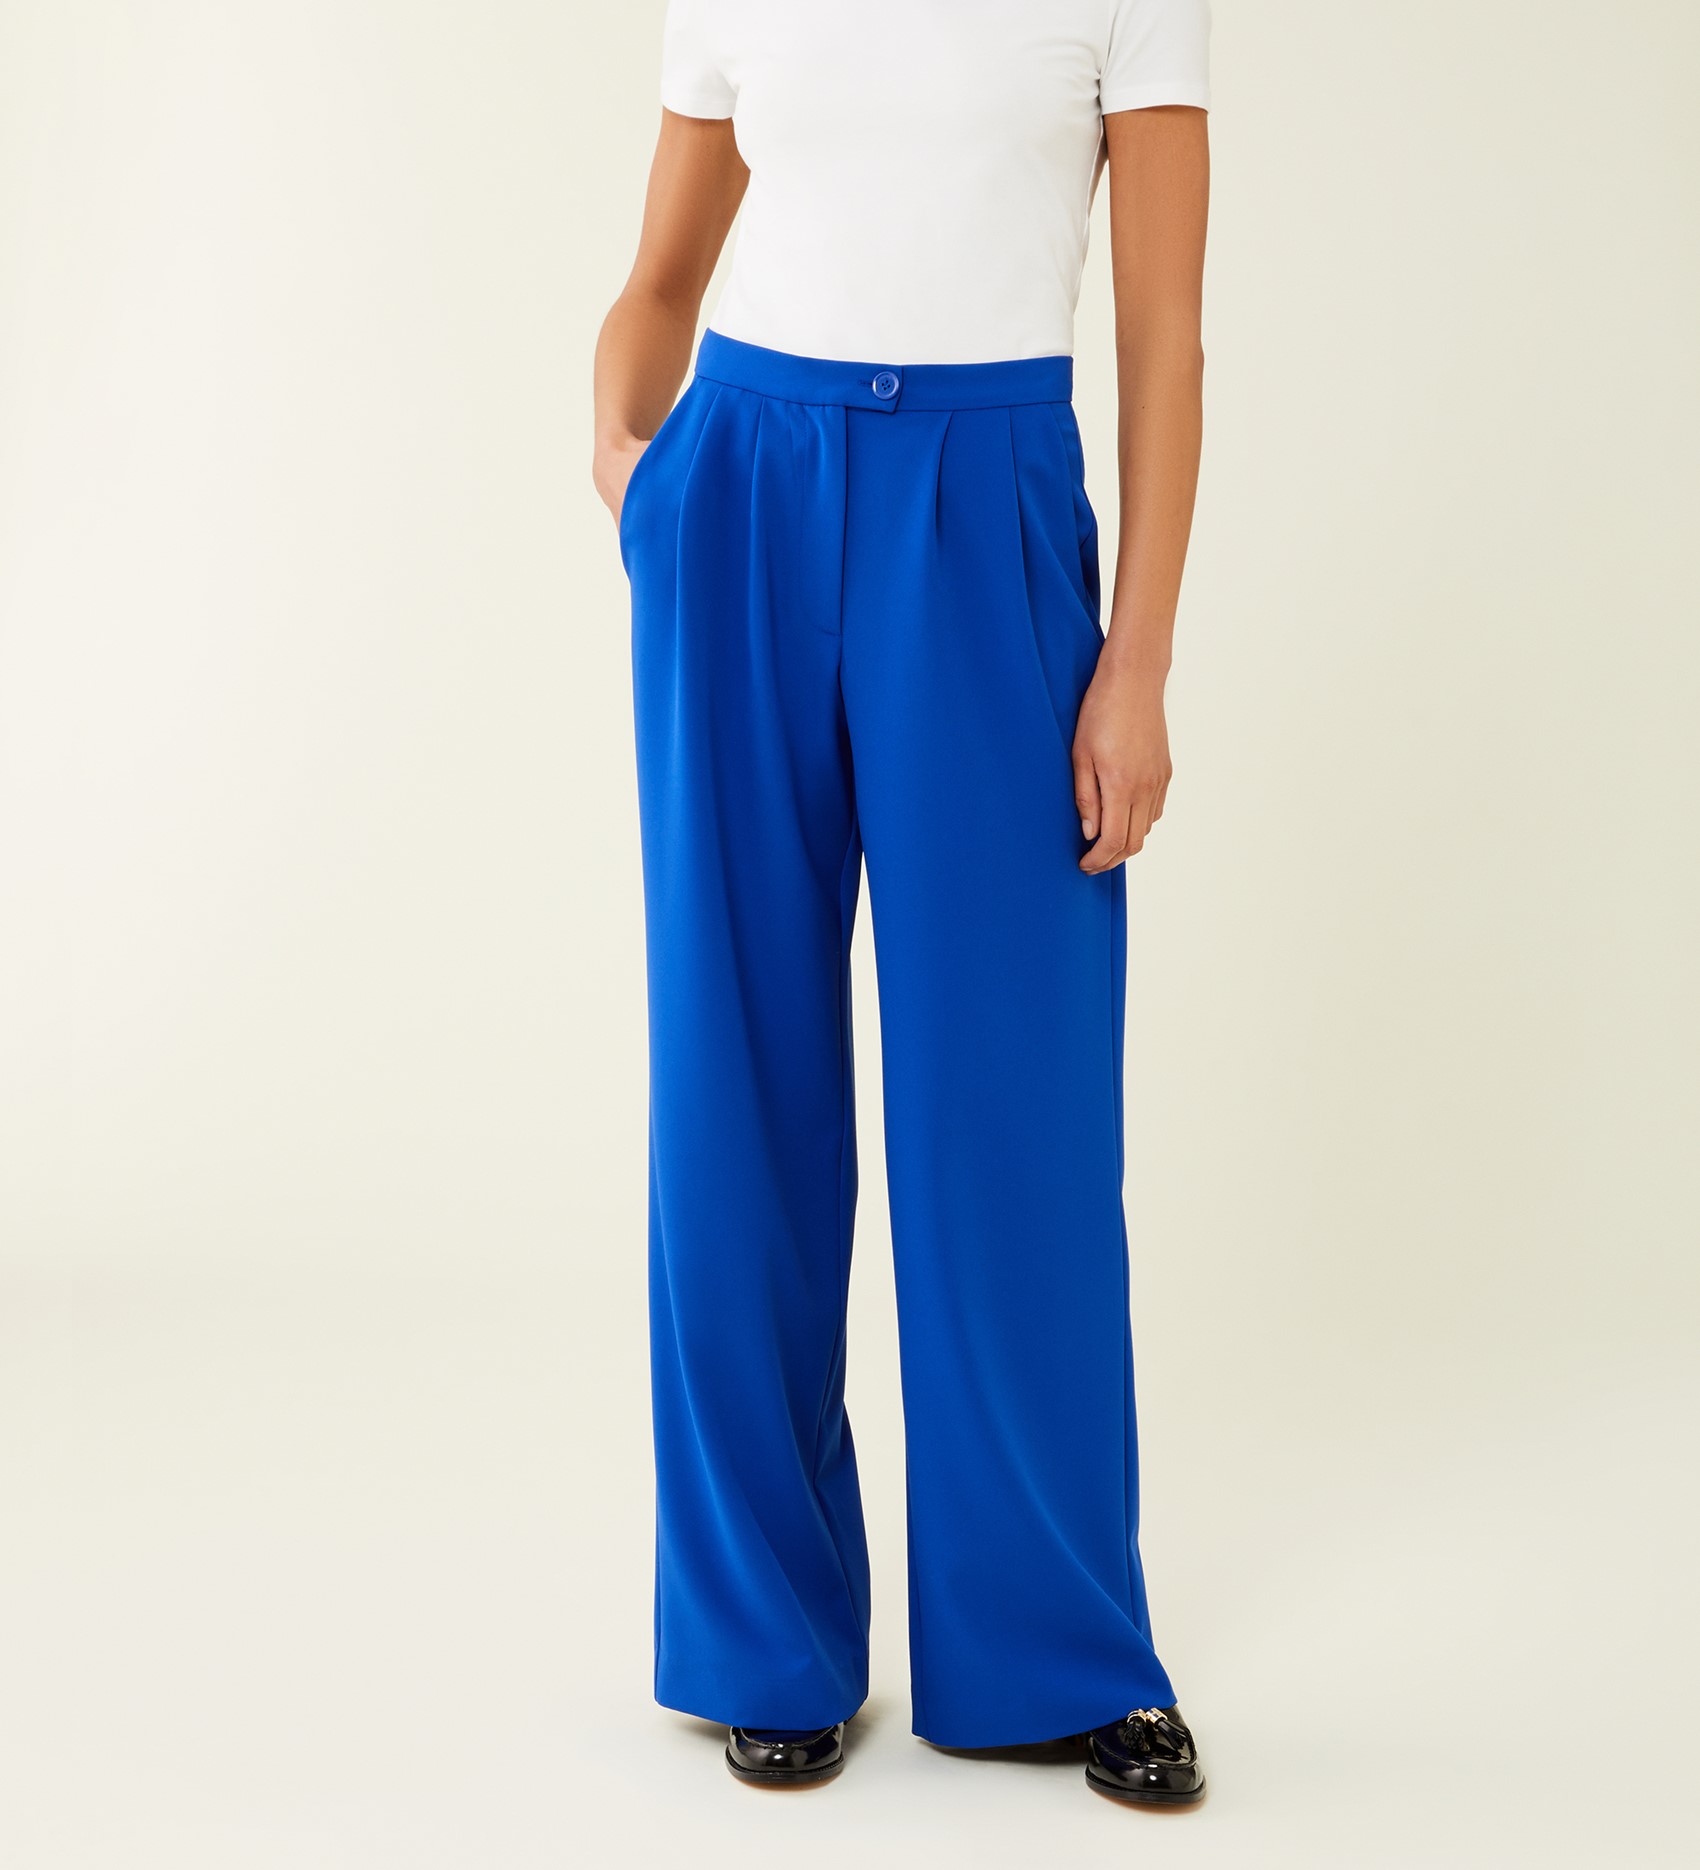 Perrie Sian Blue Wide Leg Trousers  In The Style